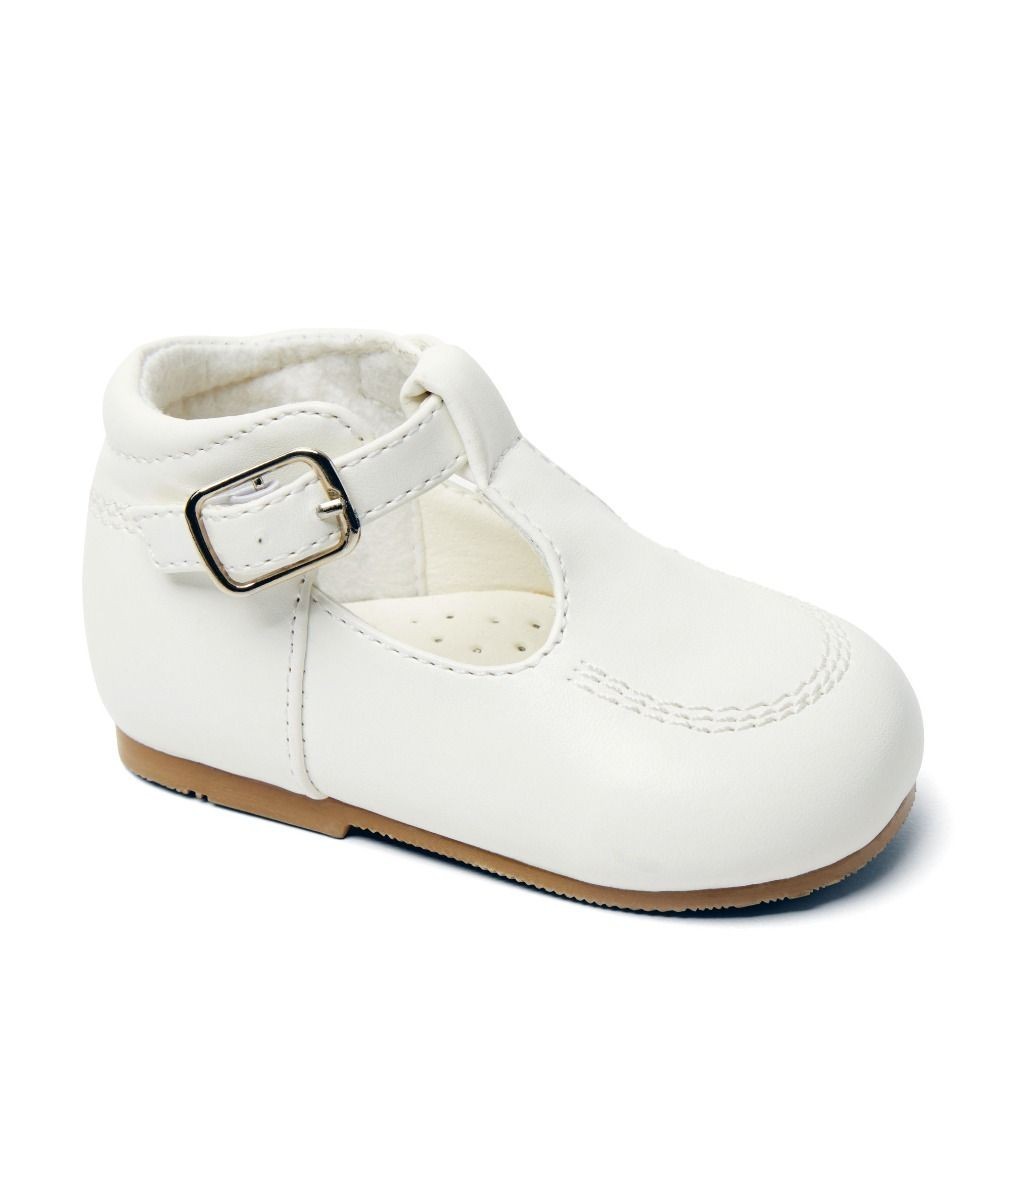 Baby & Boys Buckled Leather Shoes – TEDDY - White